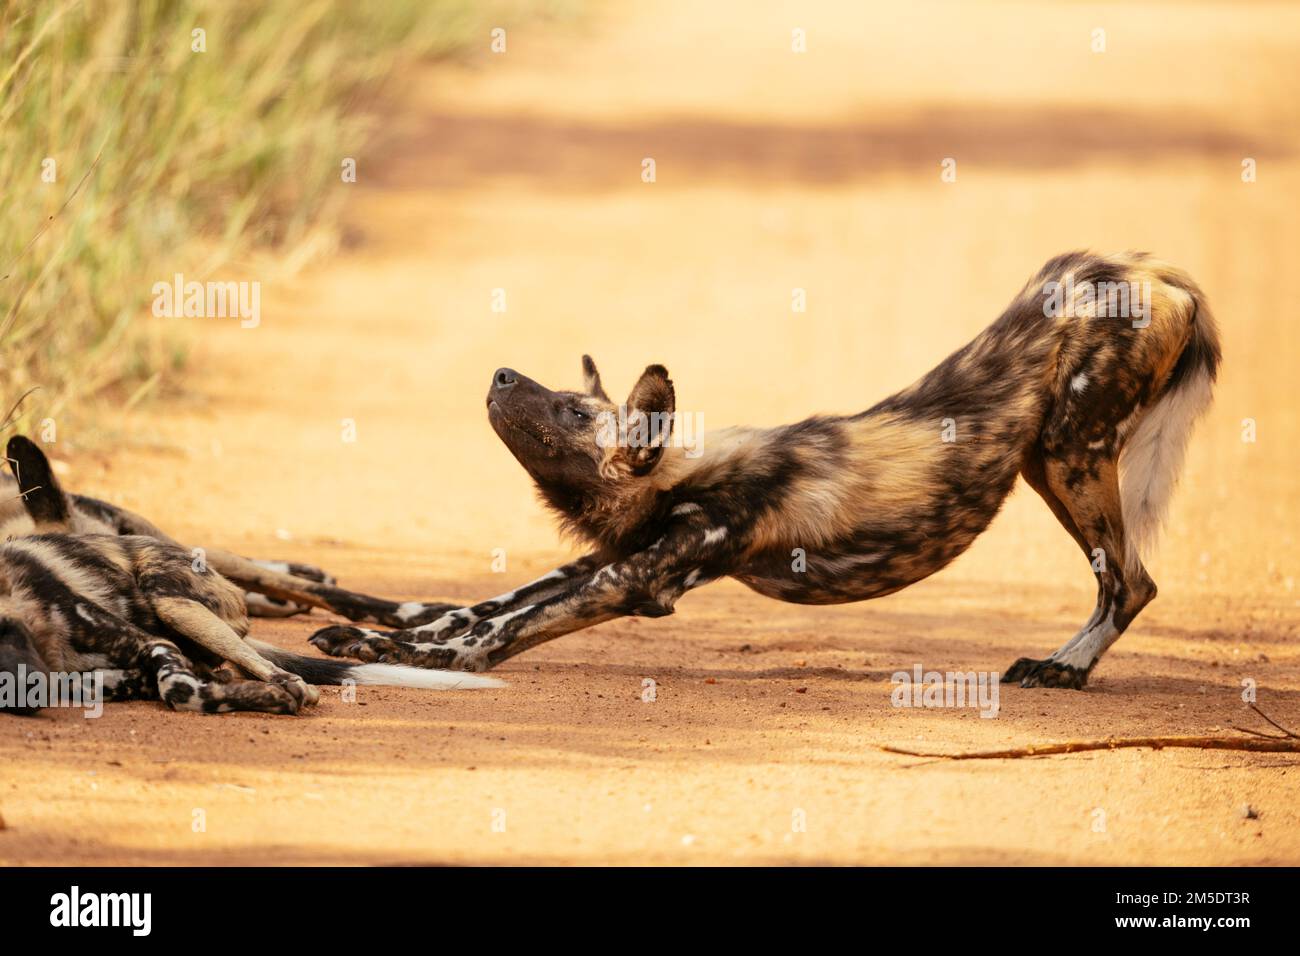 African Wild Dog (lupo dipinto), Timbavati Riserva Naturale privata, Parco Nazionale Kruger, Sud Africa Foto Stock